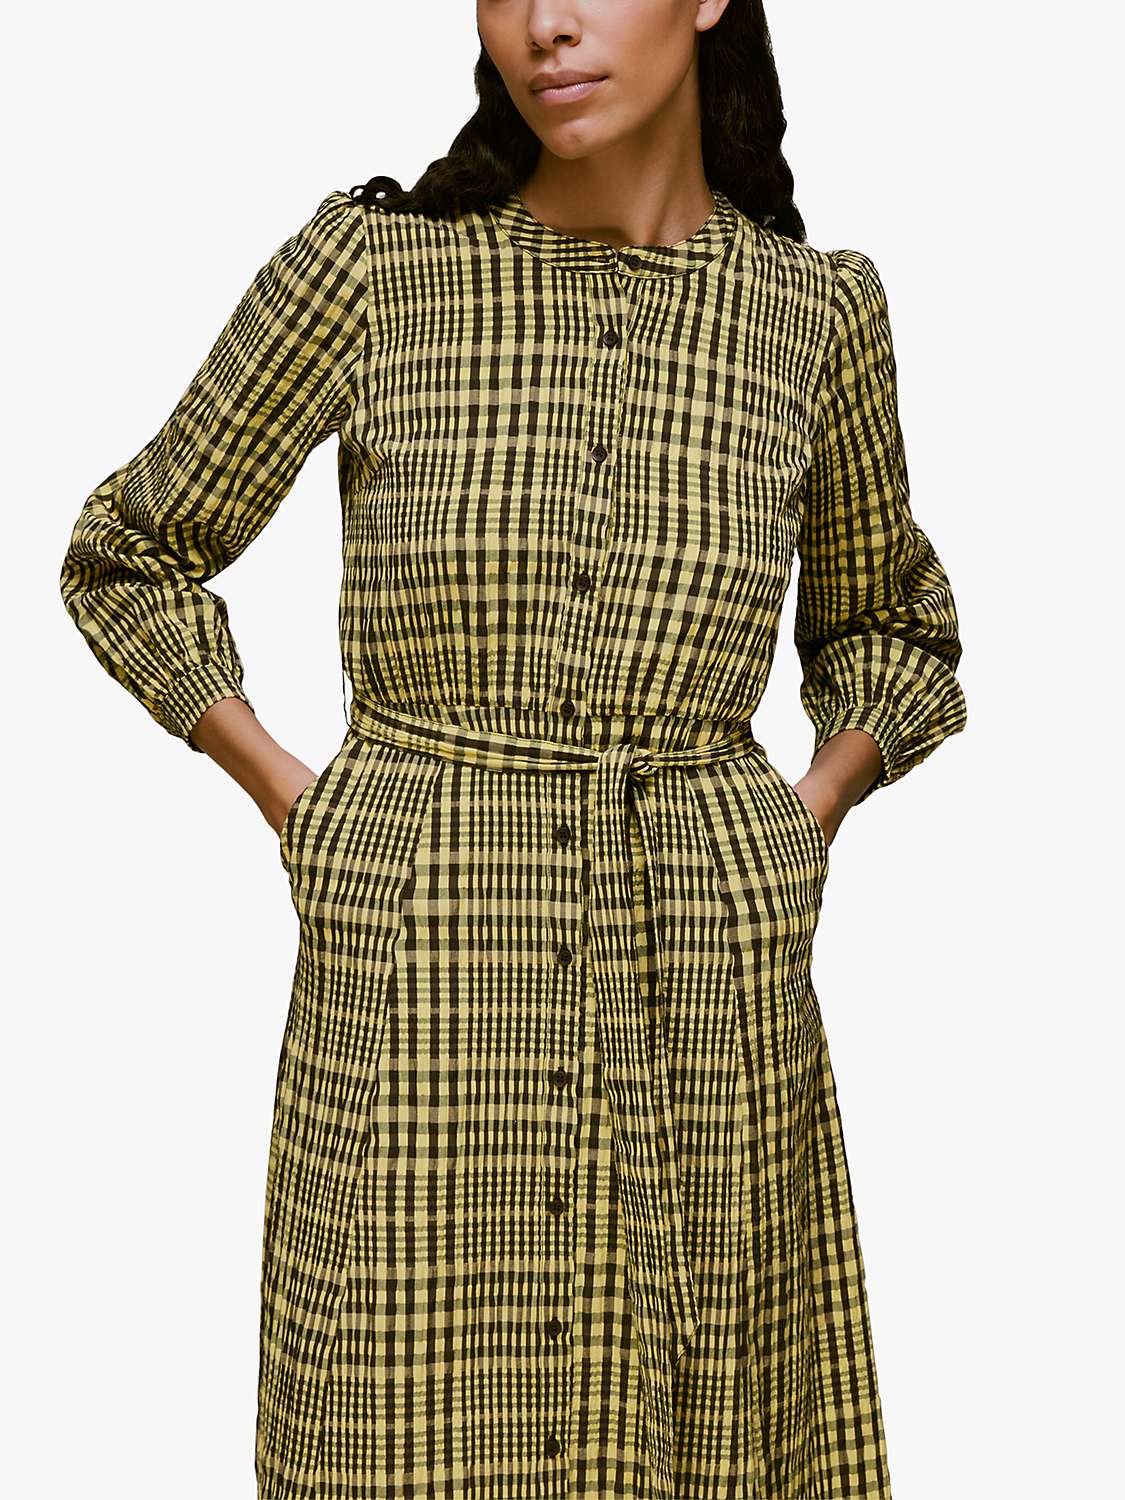 Buy Whistles Nora Gingham Check Dress, Yellow/Multi Online at johnlewis.com